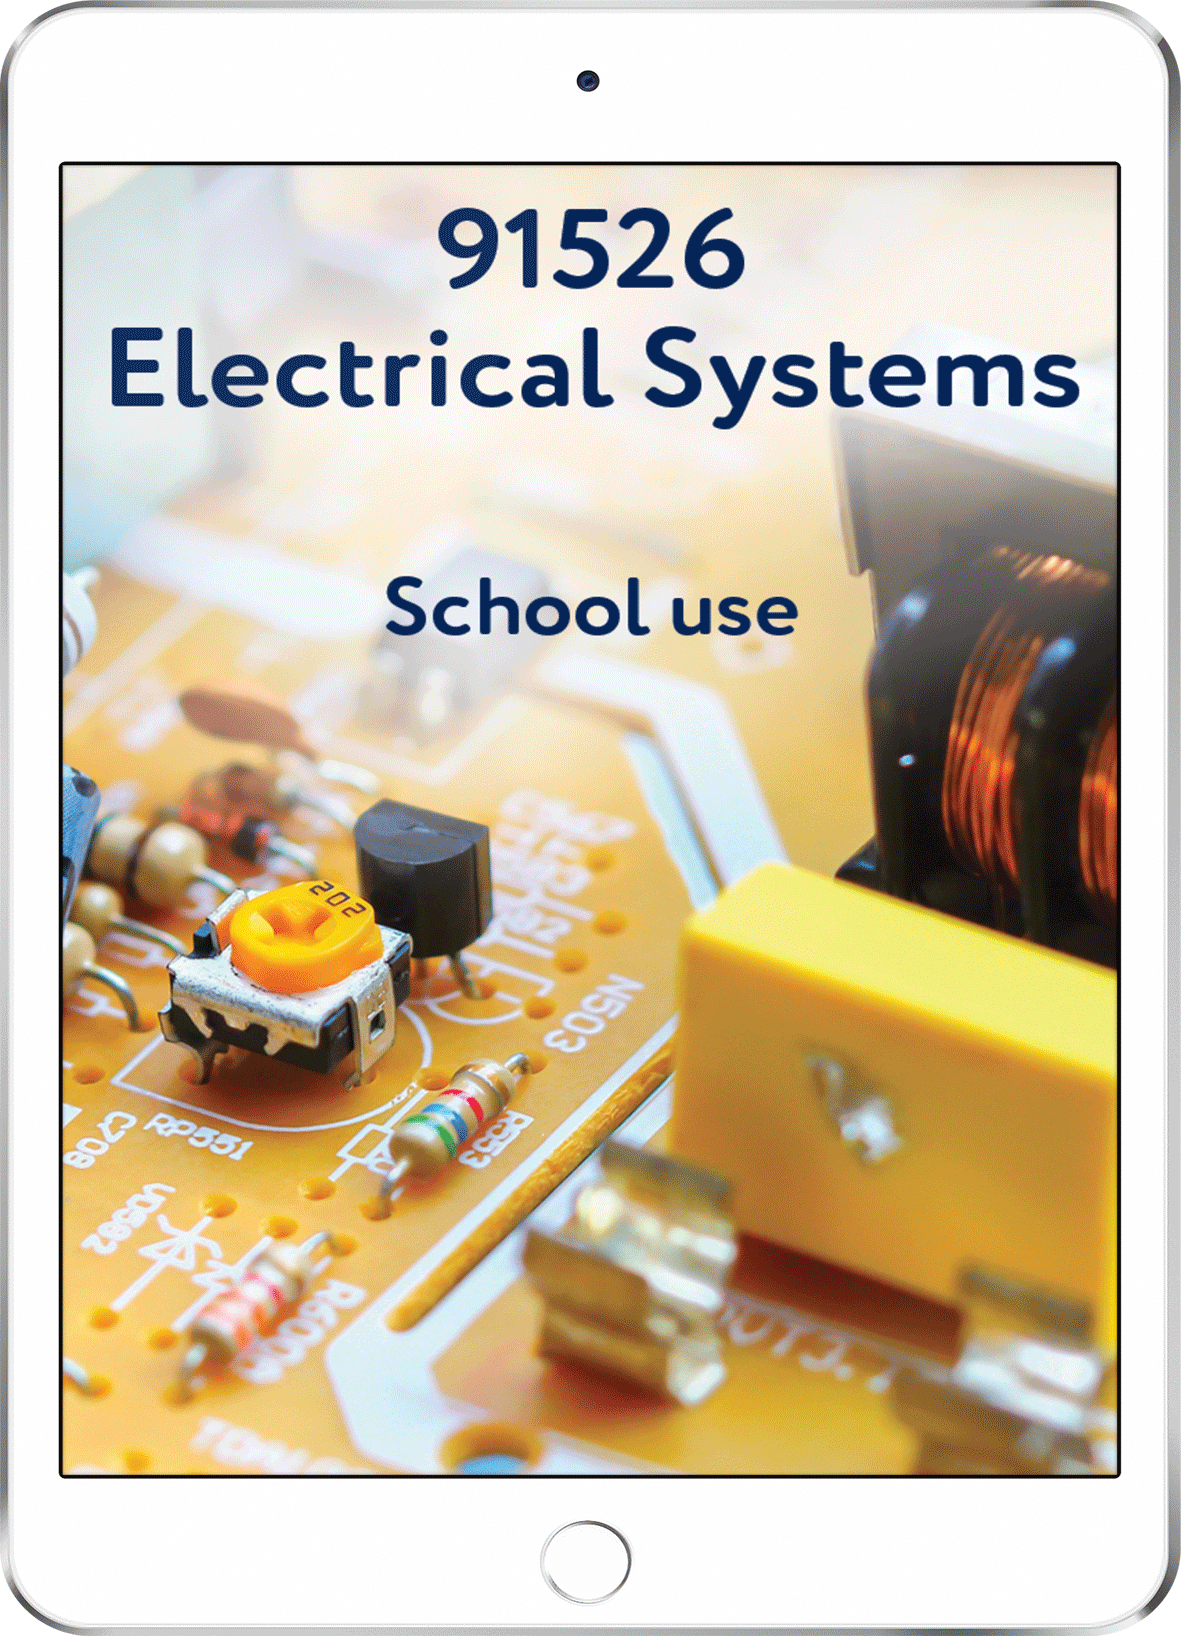 91526 Electrical Systems - School Use